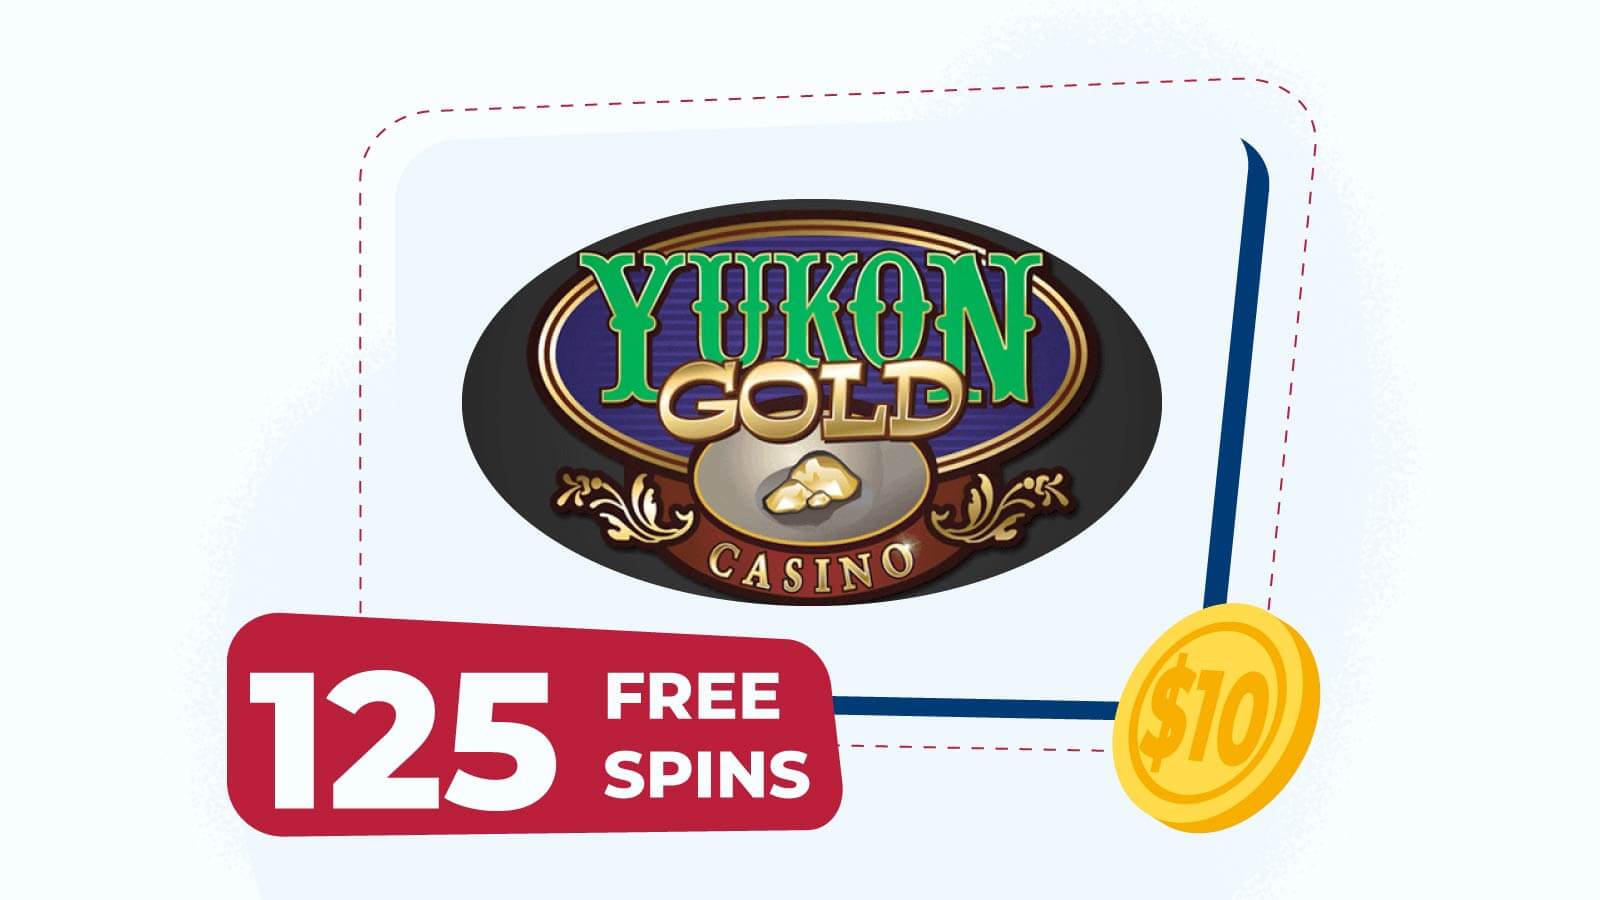 125 free spins for $10 at Yukon Gold Casino Canada